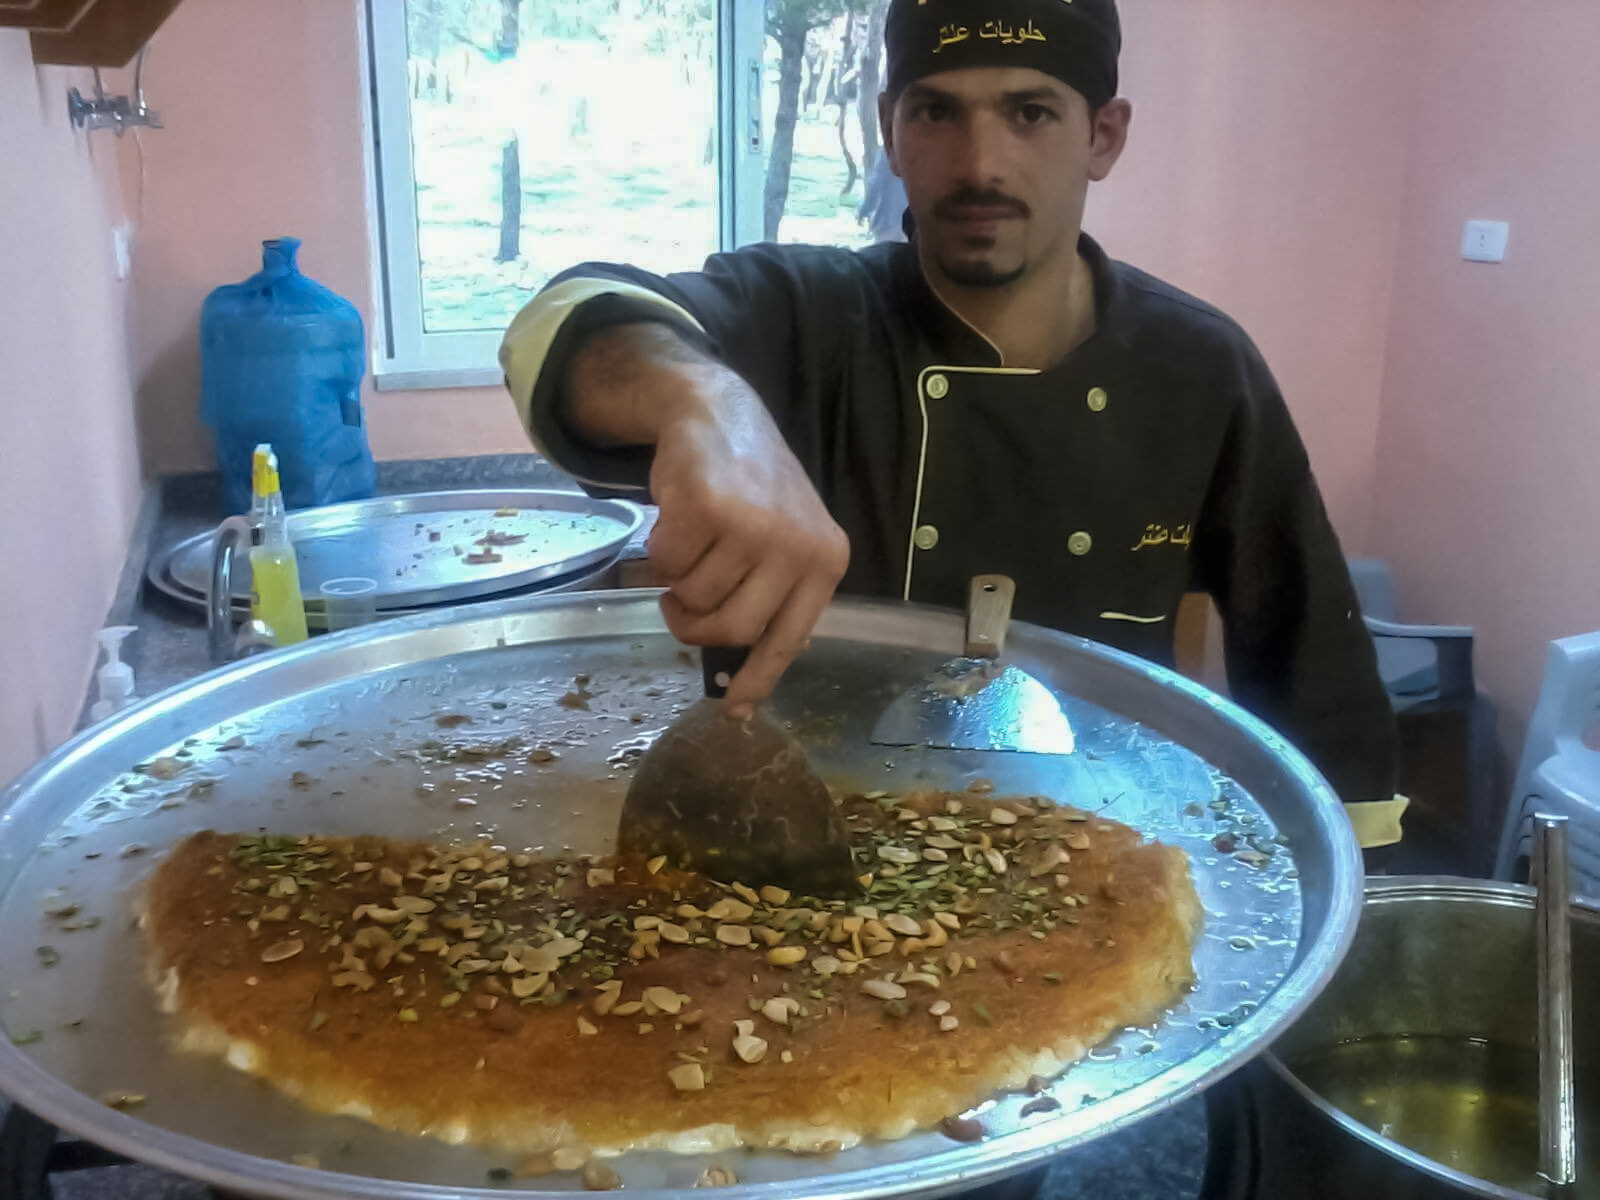 Nour cutting into kanafeh while working at a dessert shop in Jordan (Photo courtesy of Nour).